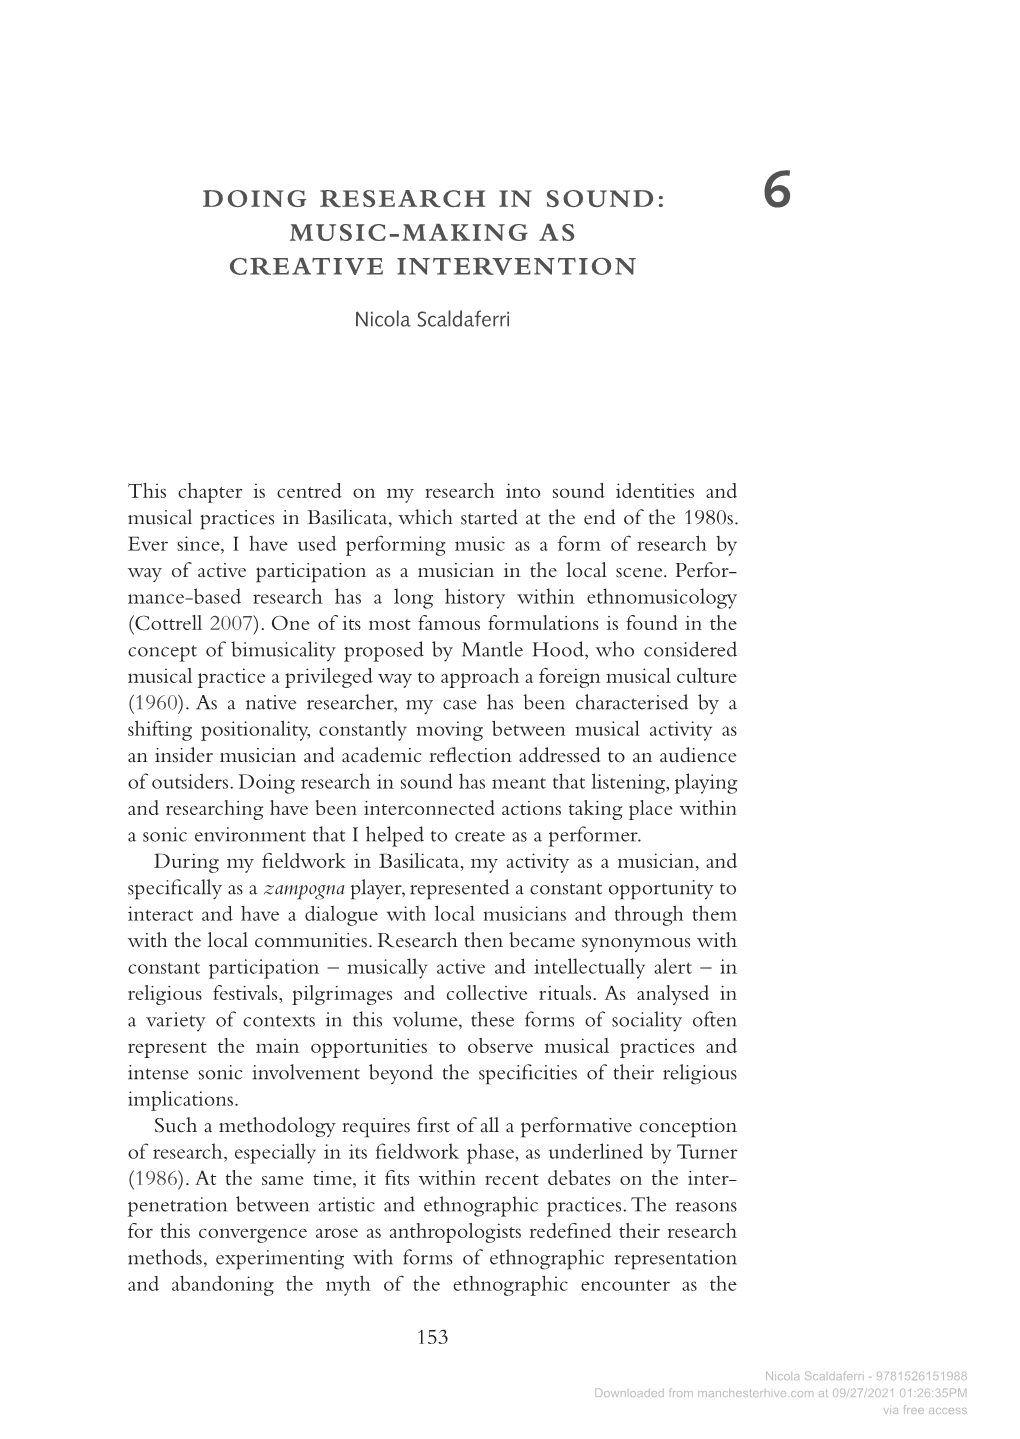 Music-Making As Creative Intervention